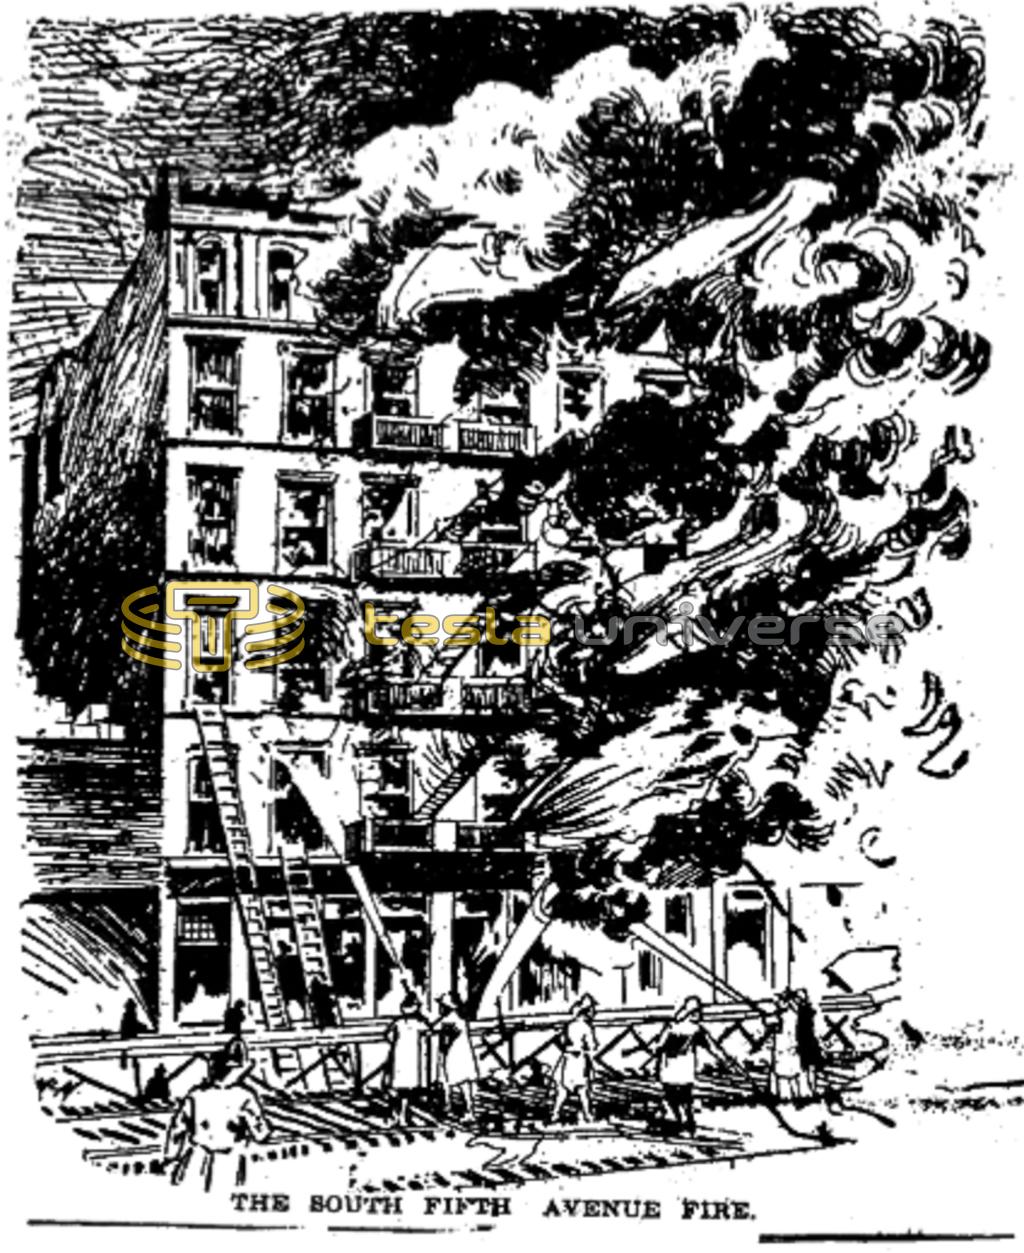 The fire of Tesla's New York laboratory at South 5th Ave.